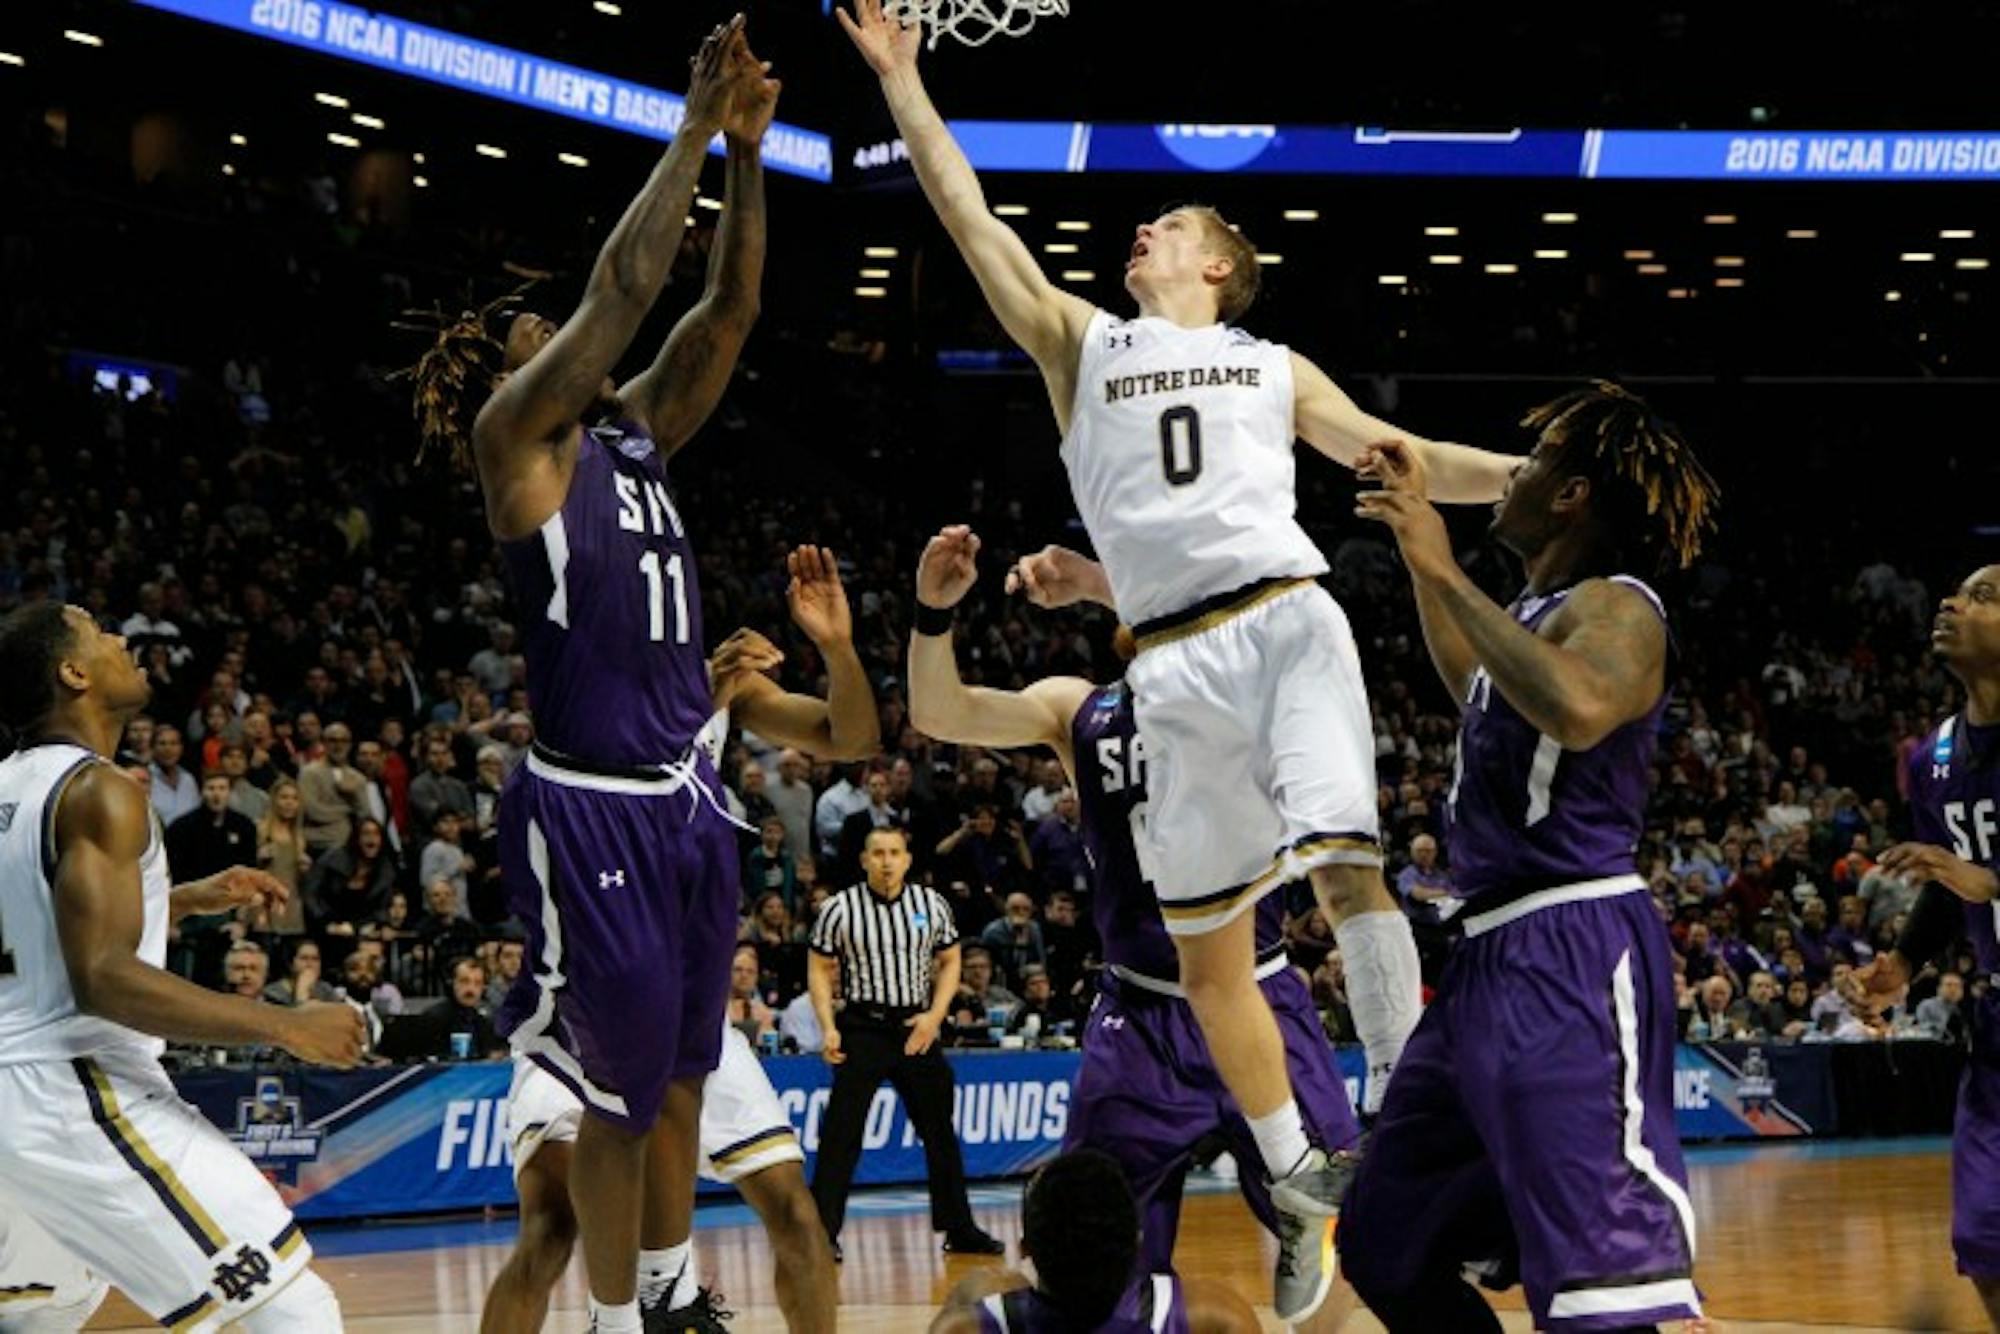 Freshman guard Rex Pflueger scores on a tip-in with 1.5 seconds left to lead Notre Dame past Stephen F. Austin, 76-75, at Barclays Center on Sunday.